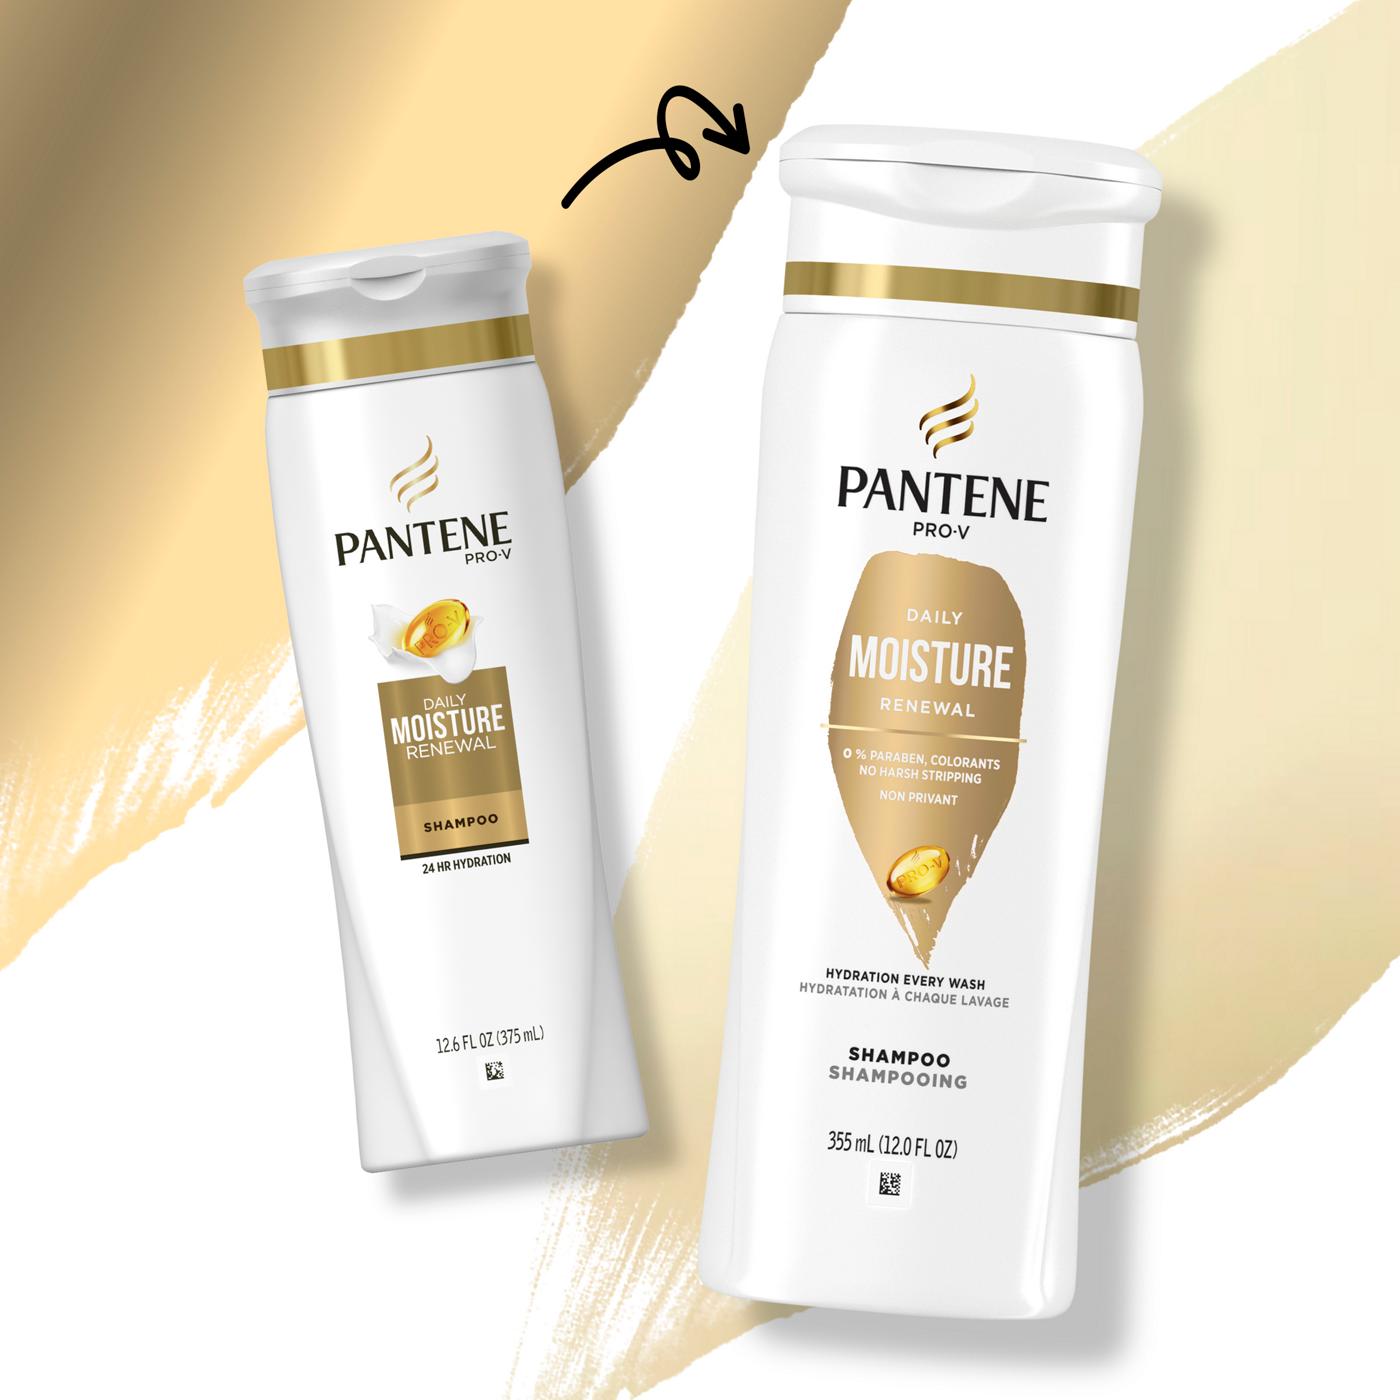 Pantene Pro-V Daily Moisture Renewal Shampoo + Conditioner - Dual Pack; image 4 of 11